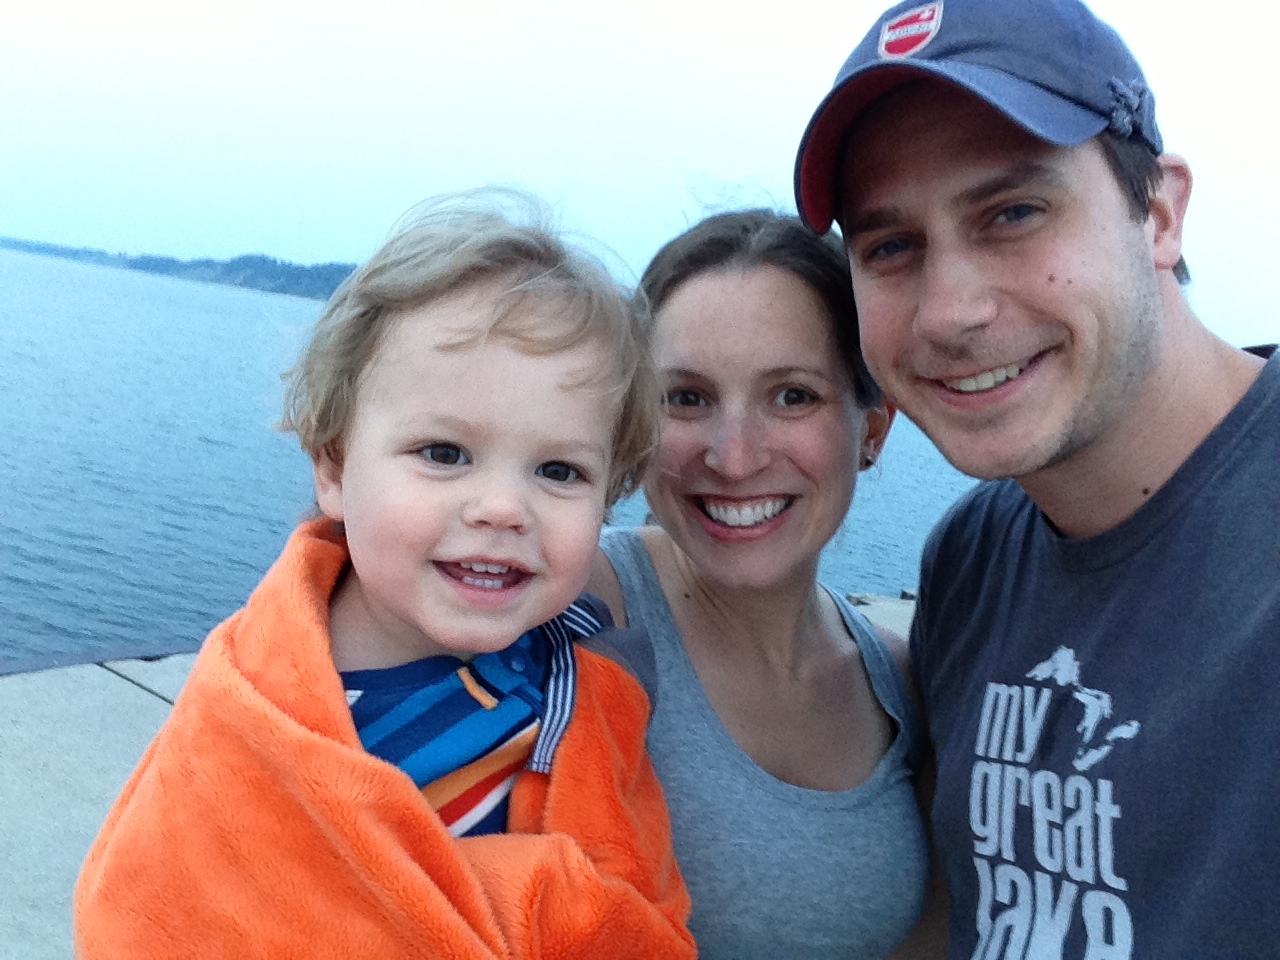 our little fam on an impromptu walk down the state park pier tonight.